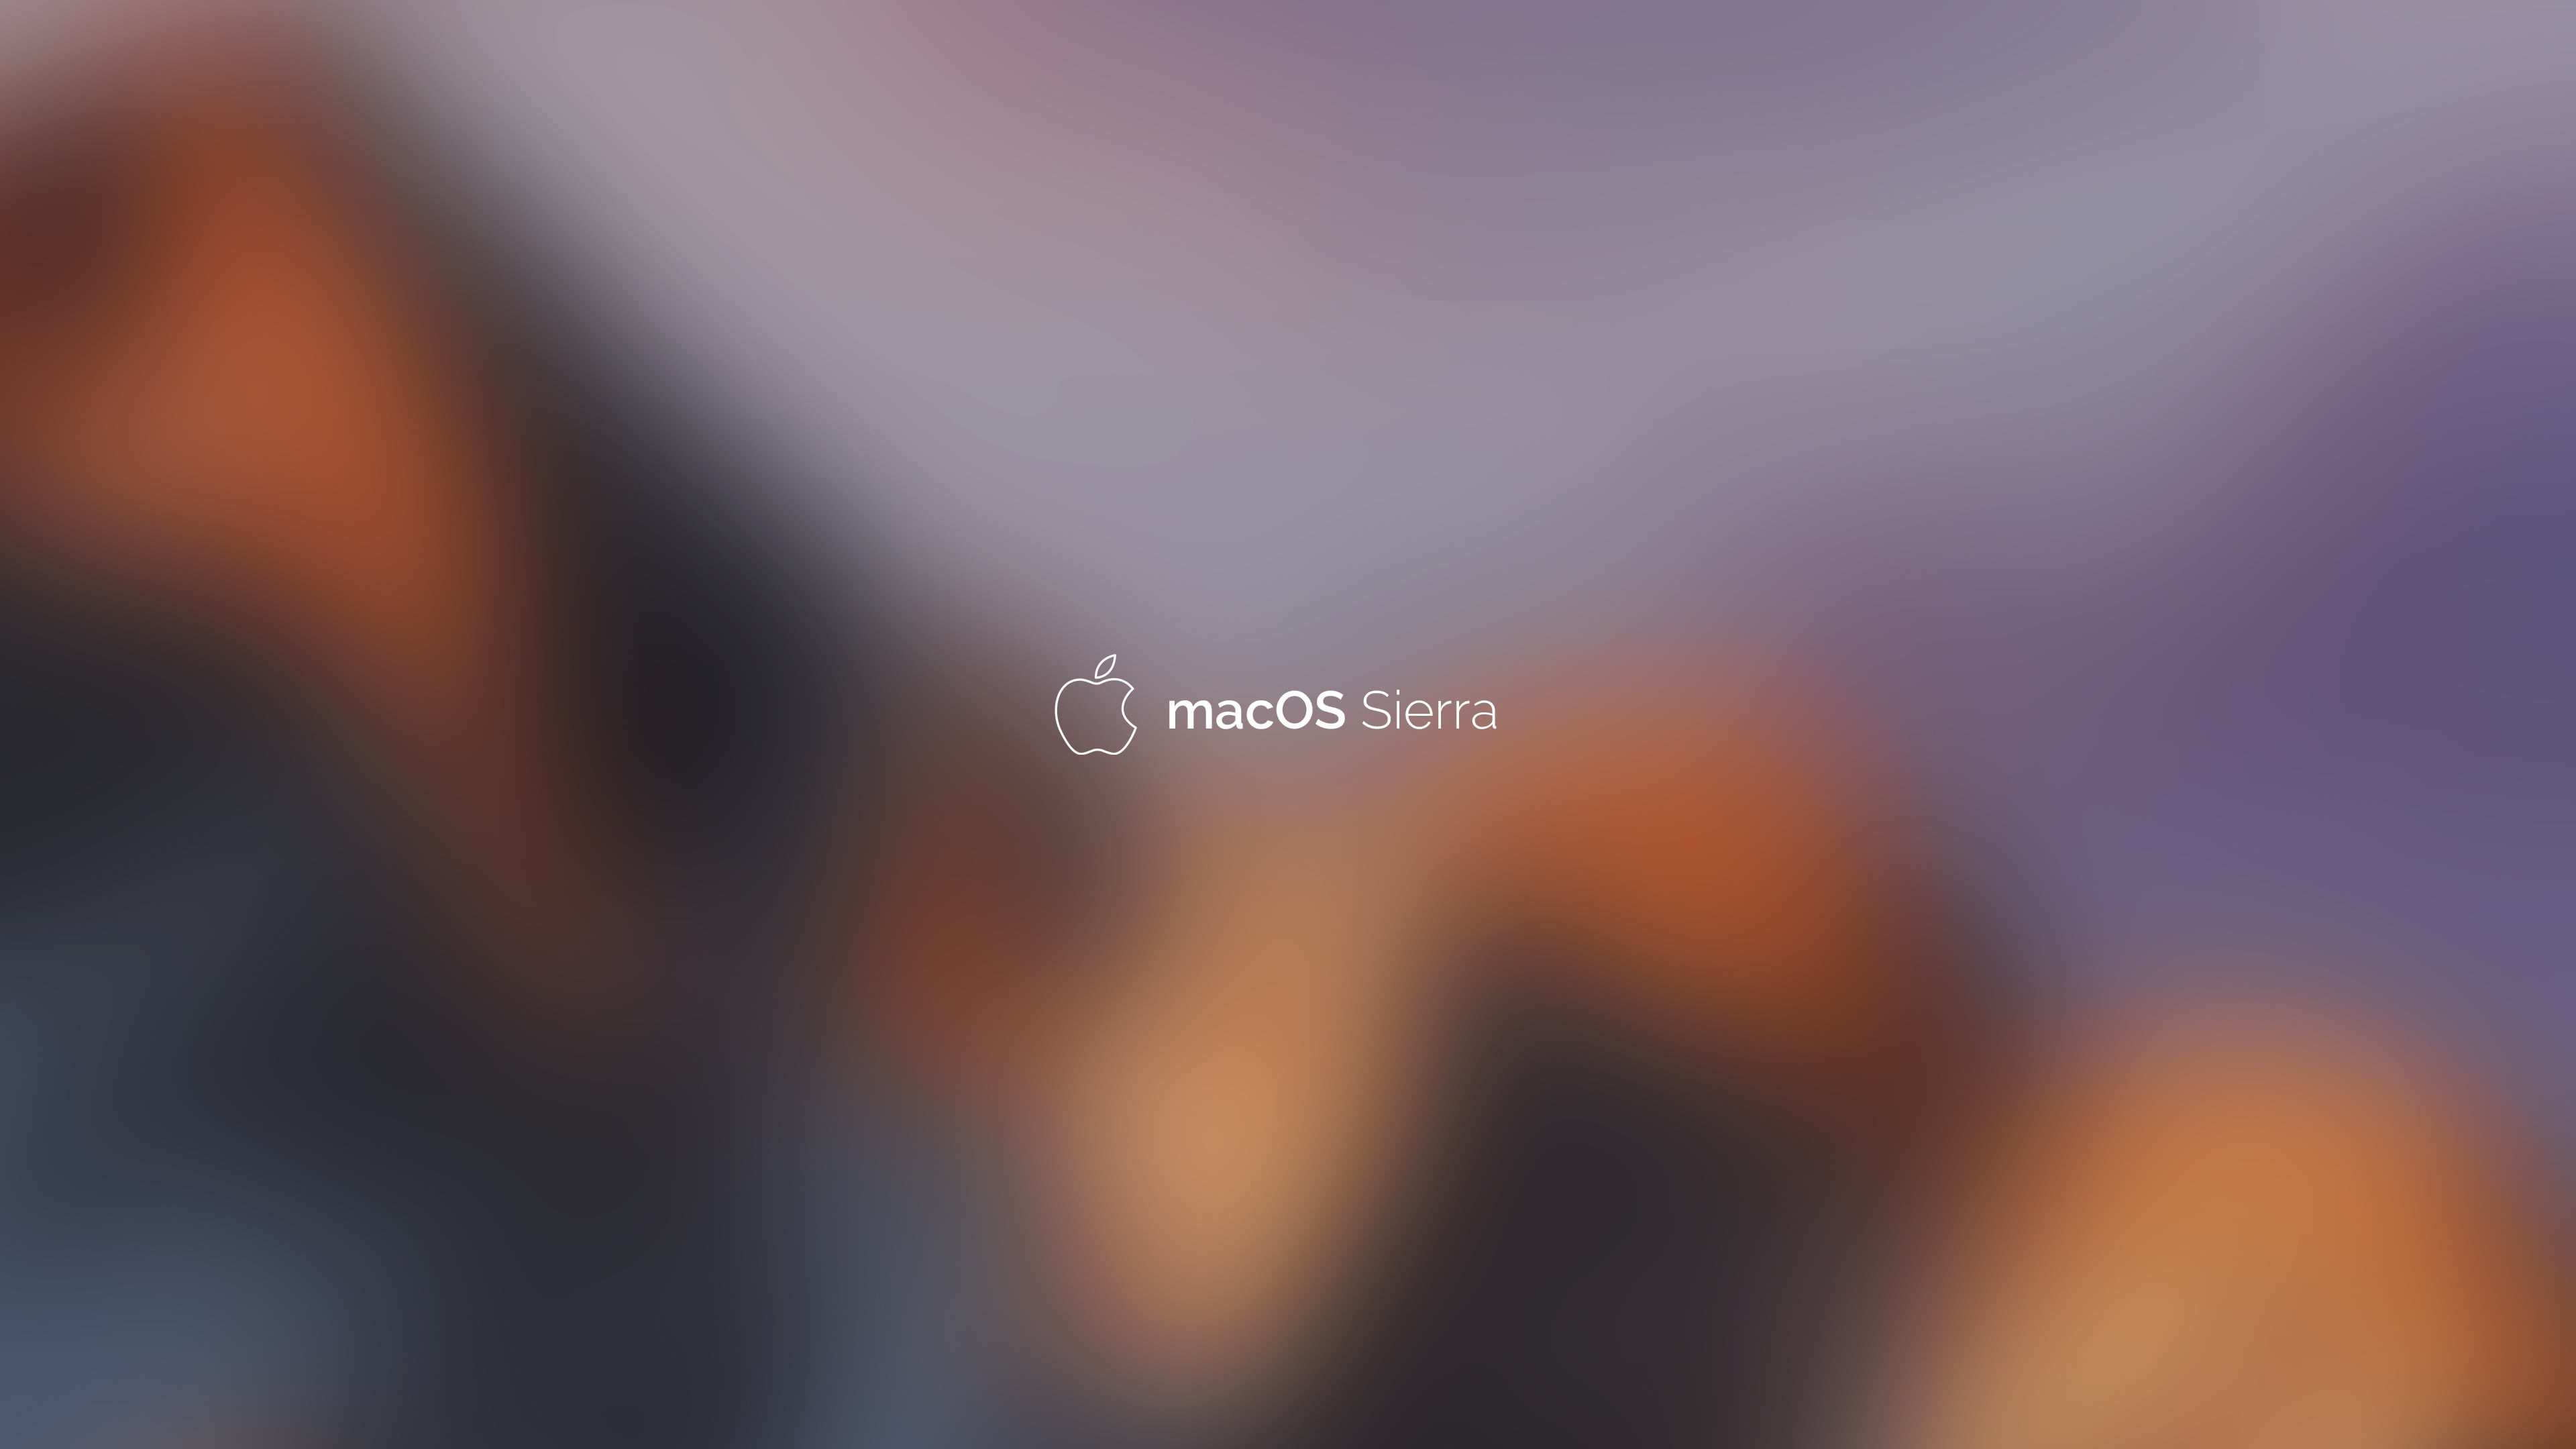 macOS Sierra, mountains, apple, backgrounds, abstract, illustration